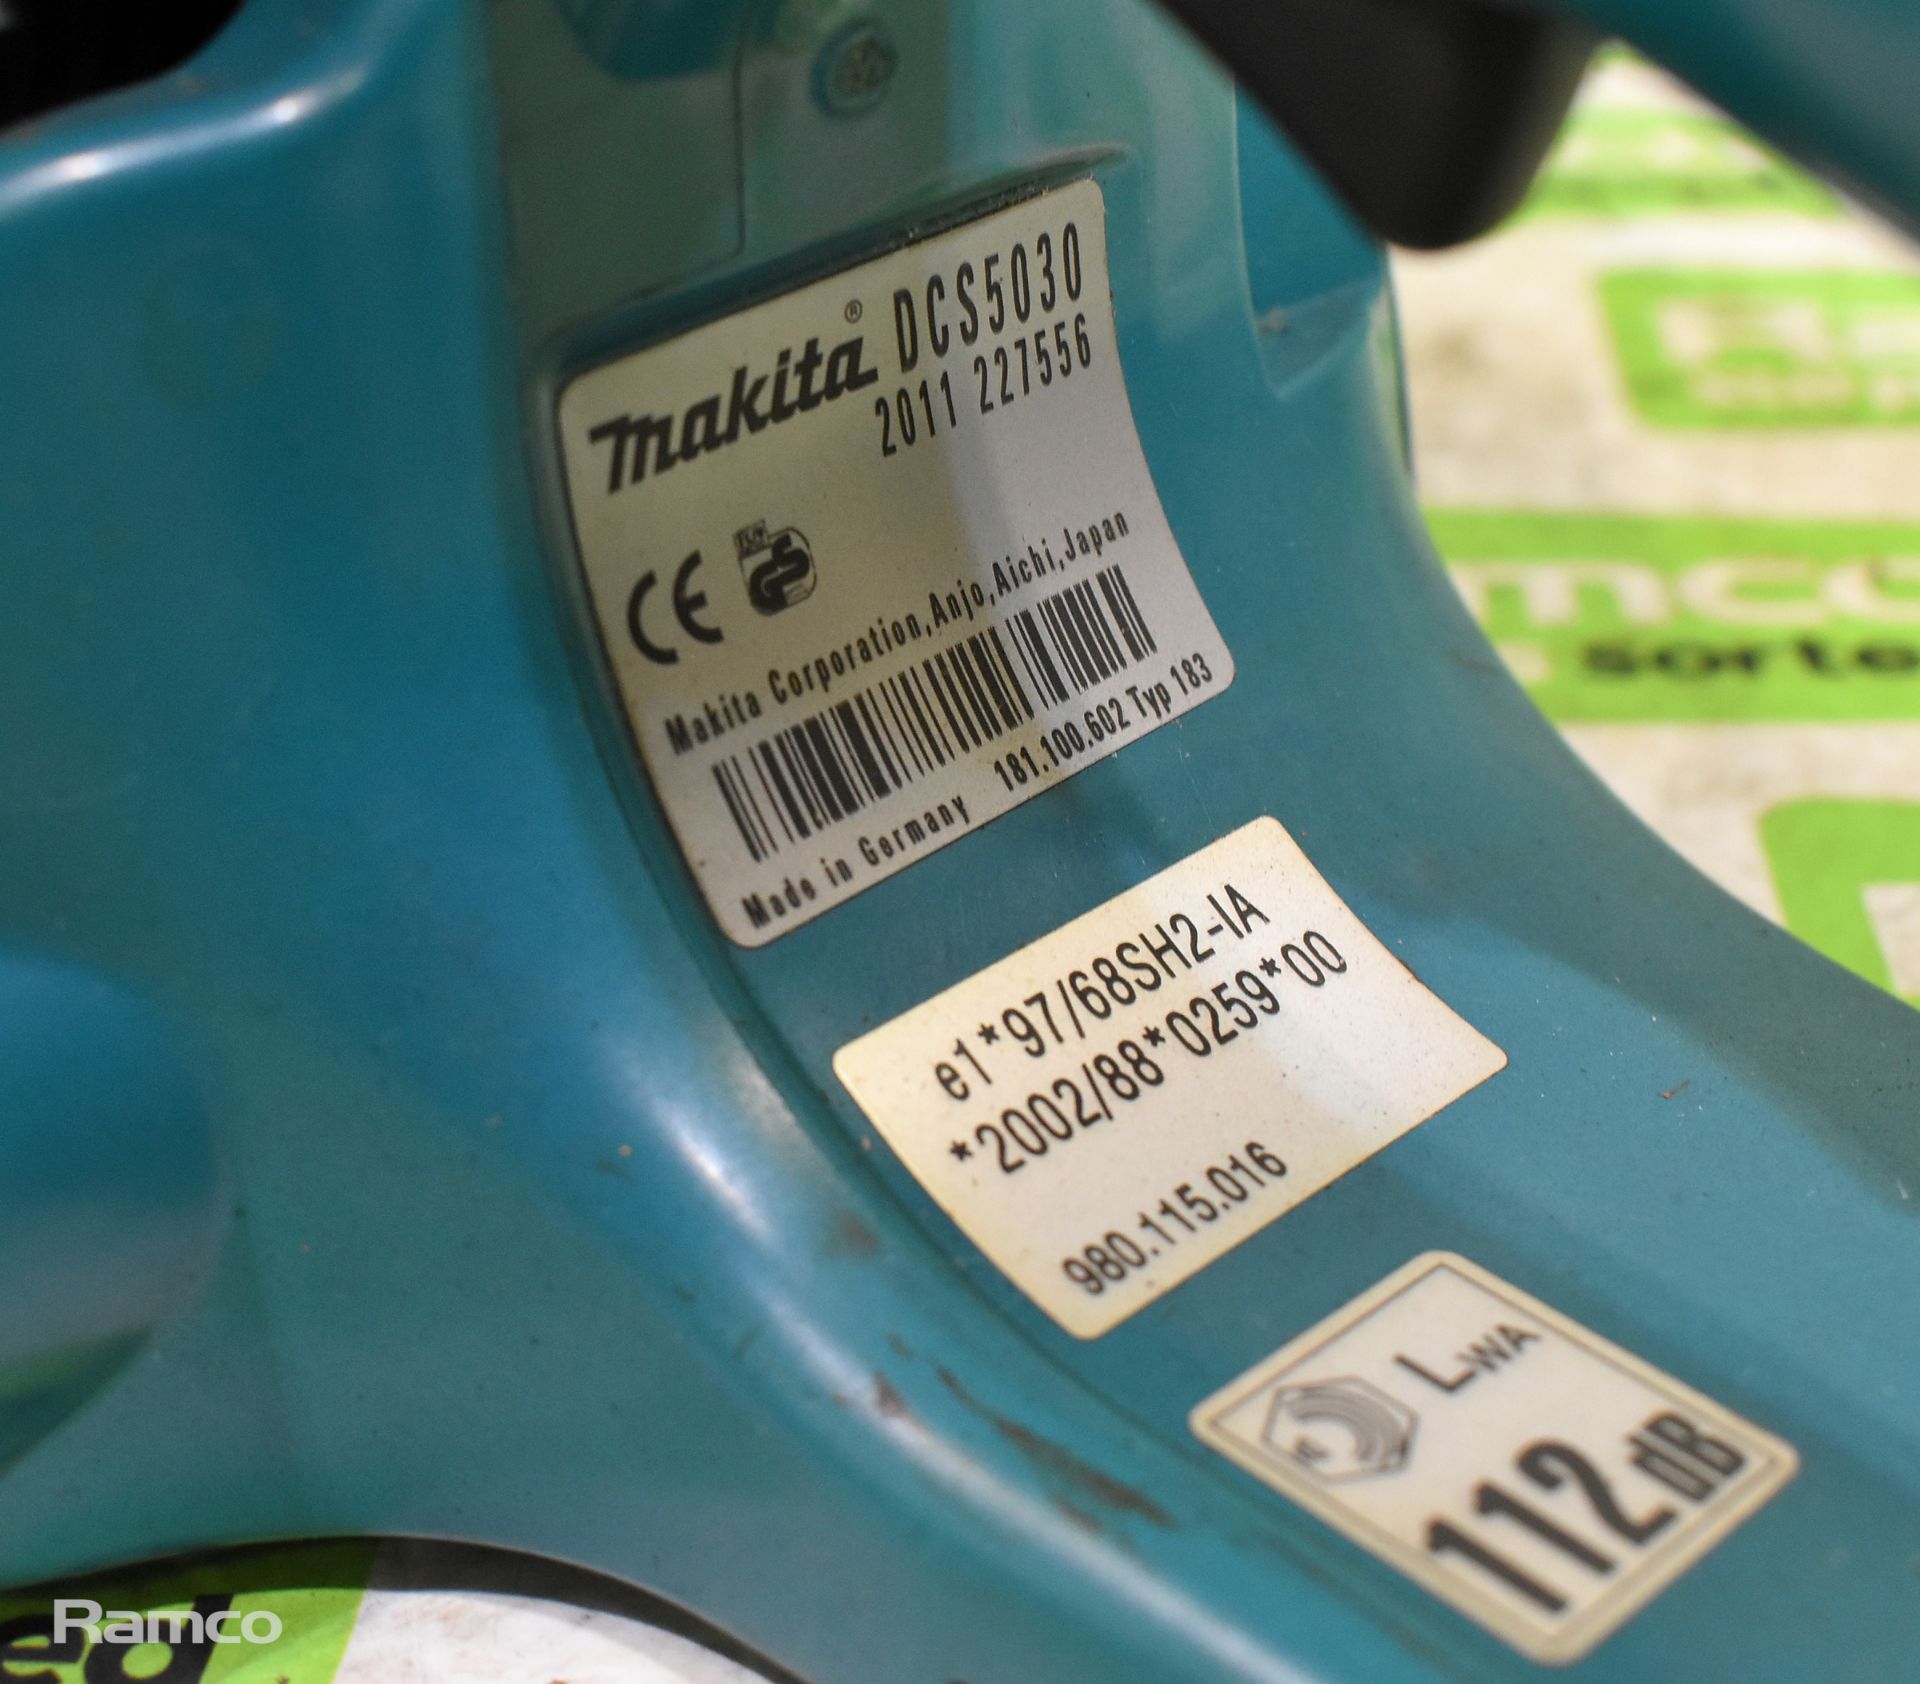 6x Makita DCS5030 50cc petrol chainsaw - BODIES ONLY - AS SPARES & REPAIRS - Image 32 of 33